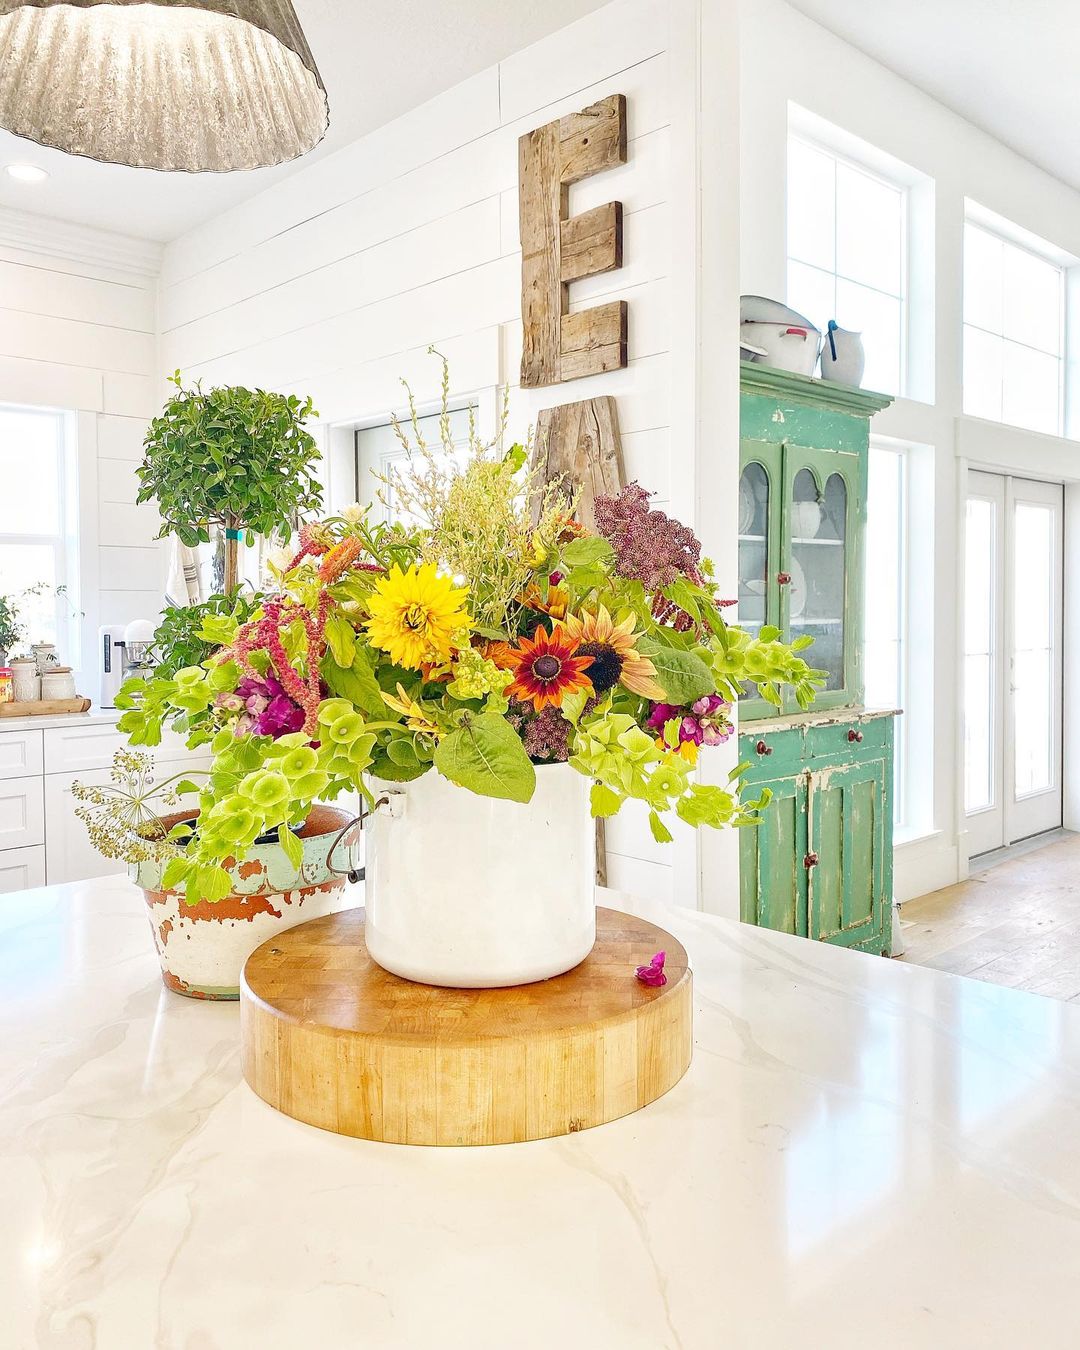 White Farmhouse Kitchen with Fresh Flowers on the Island. Photo by Instagram user @sweetpickins